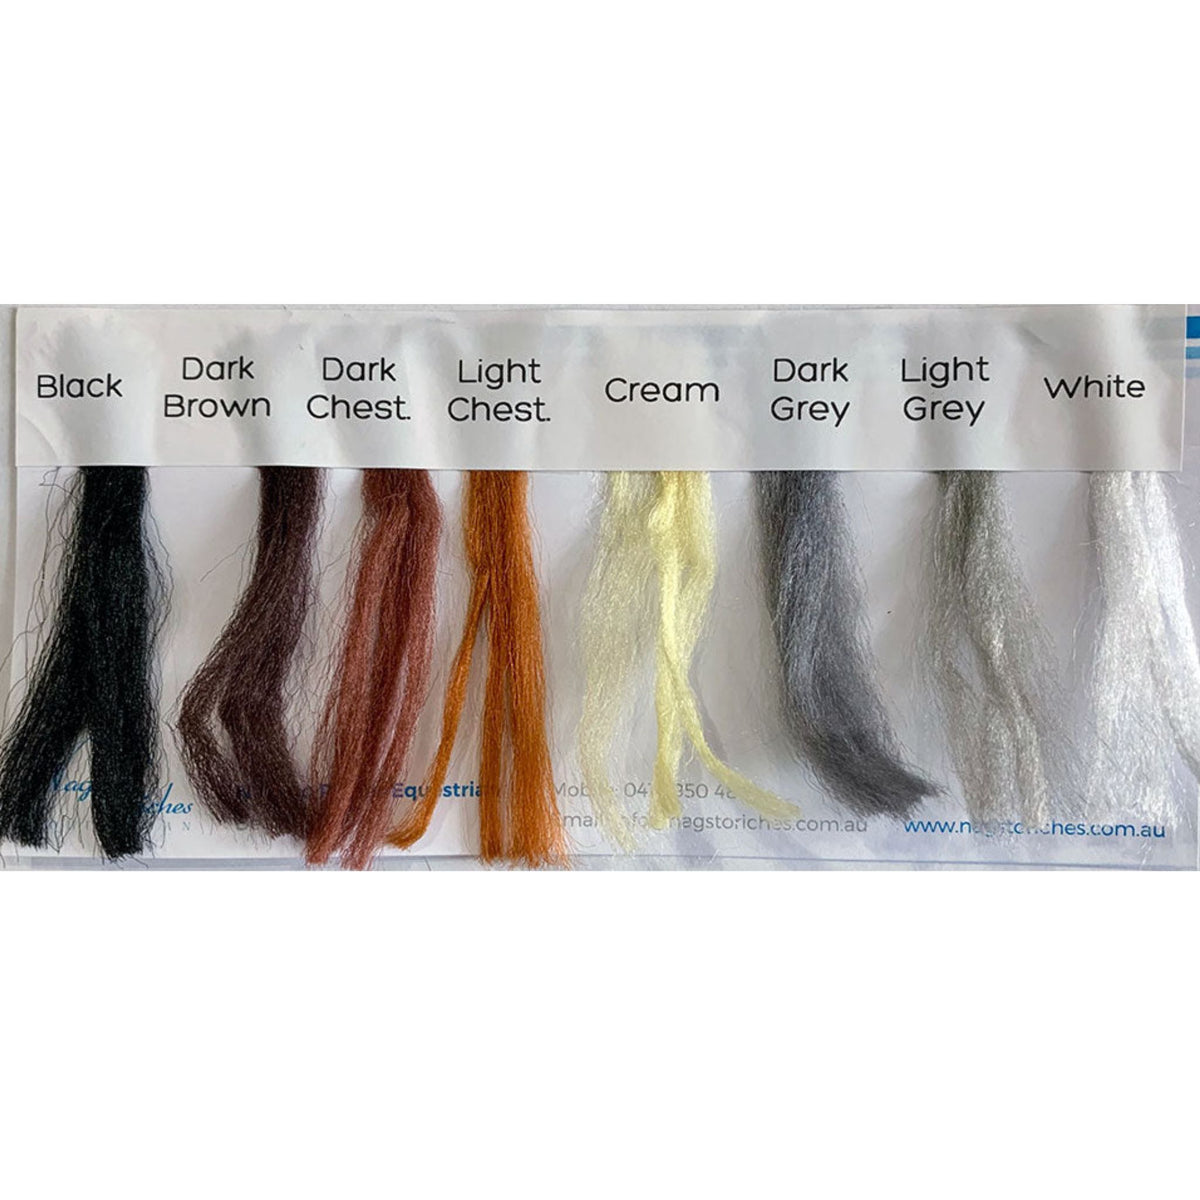 Names of plait booster colours. (sample size)